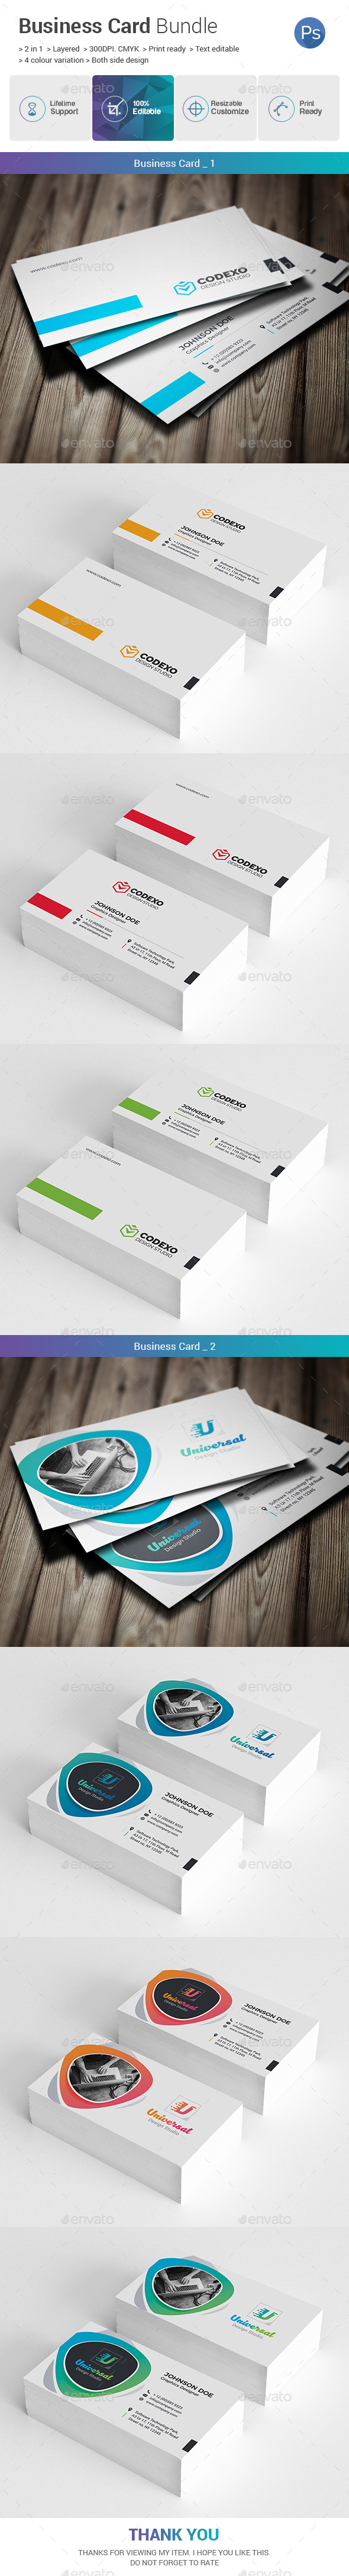 GraphicRiver Business Card Bundle 2 in 1 21097416